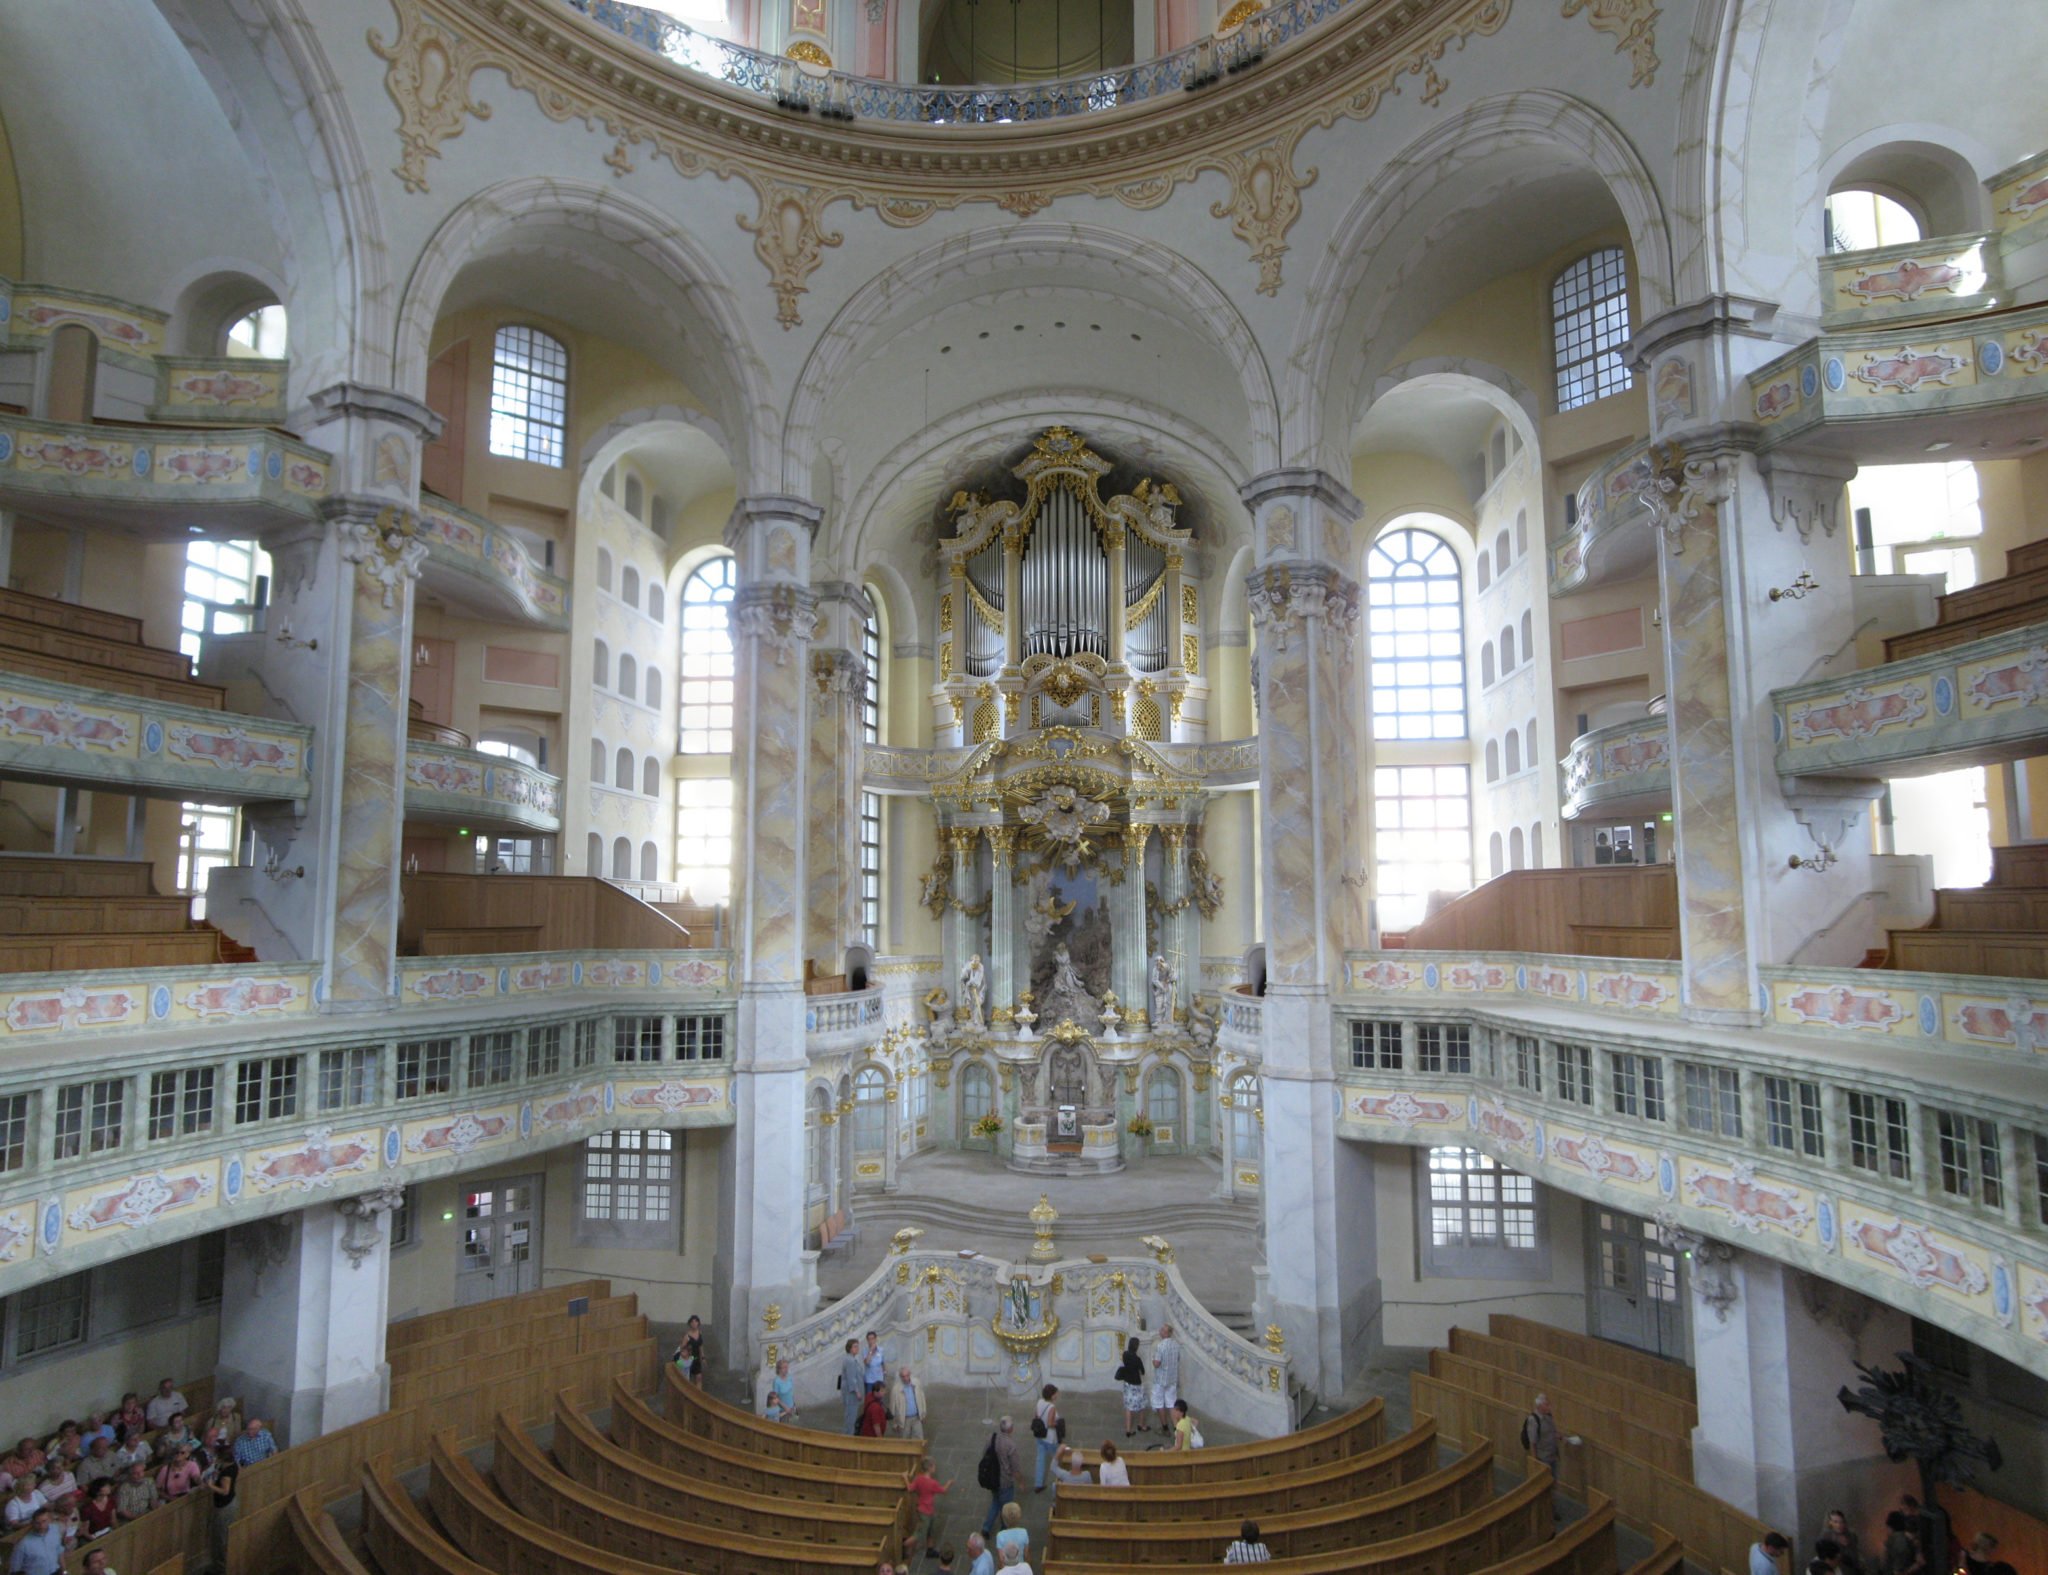 Frauenkirche_interior_2008_001-Frauenkirche_interior_2008_009, picture from internet